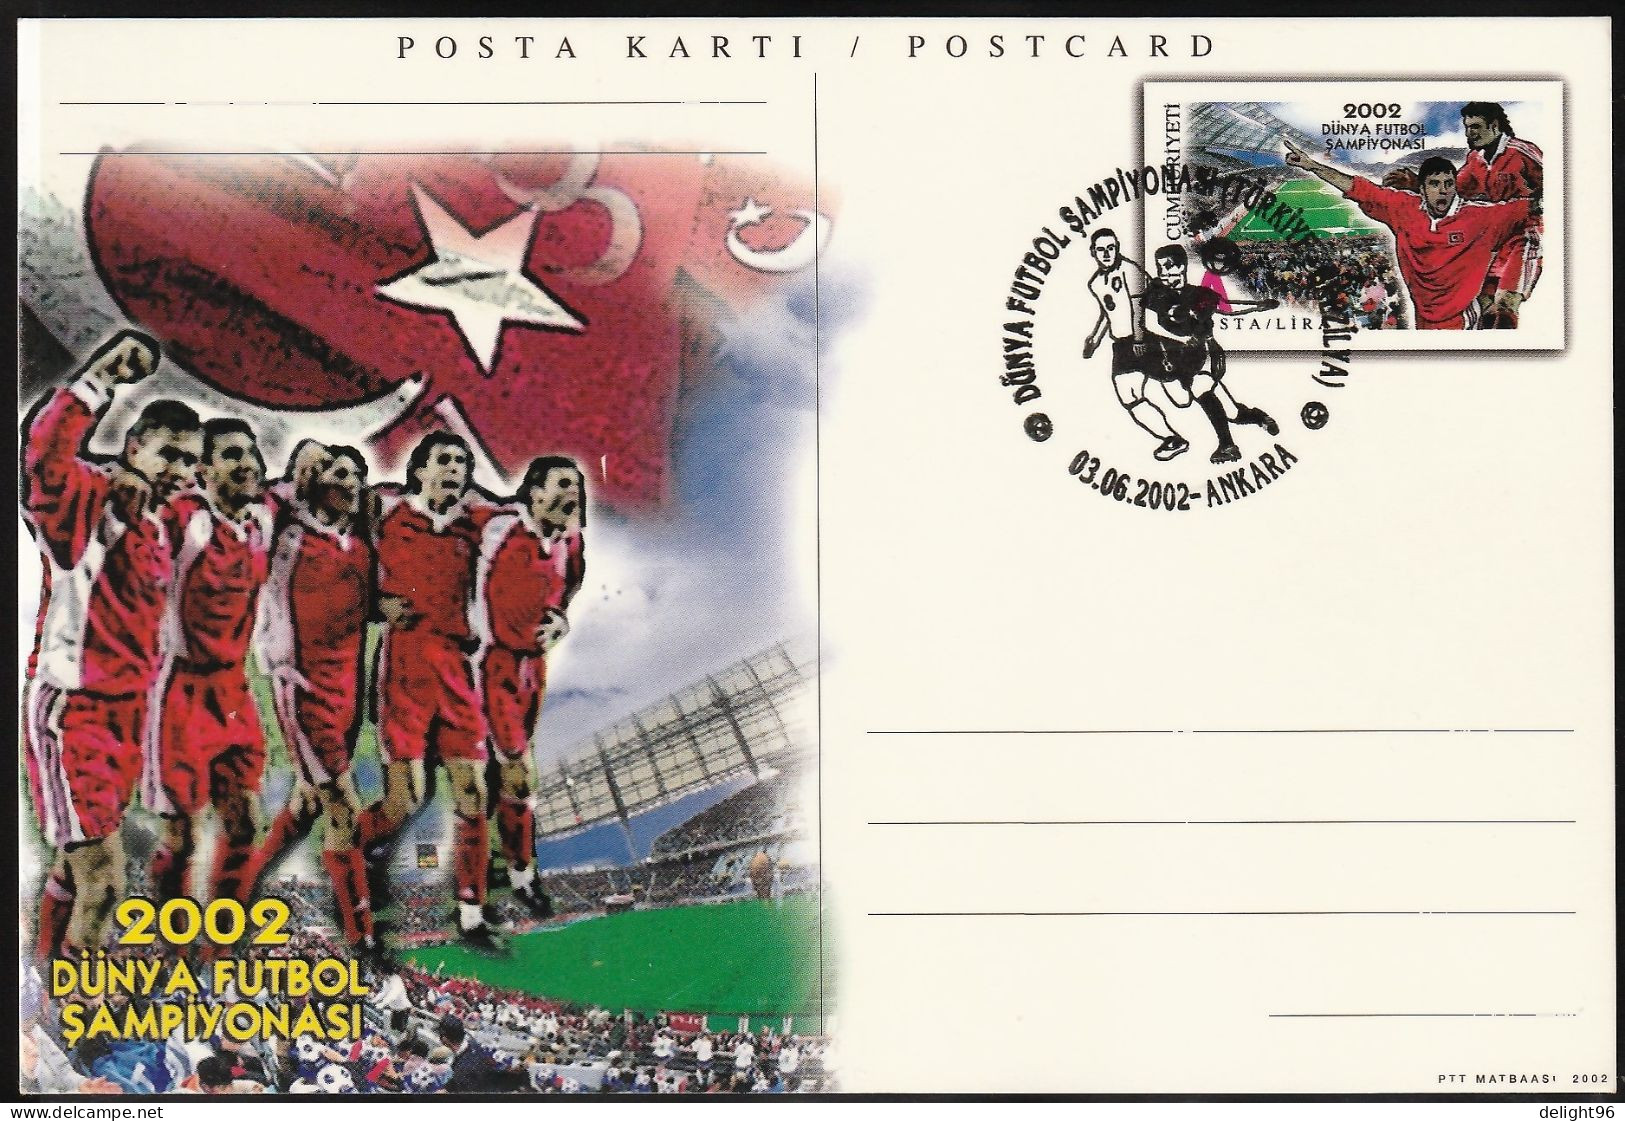 2002 Turkey Group Stage Match Vs. Brazil At FIFA World Cup In South Korea-Japan Commemorative Cancellation On PSC - 2002 – South Korea / Japan